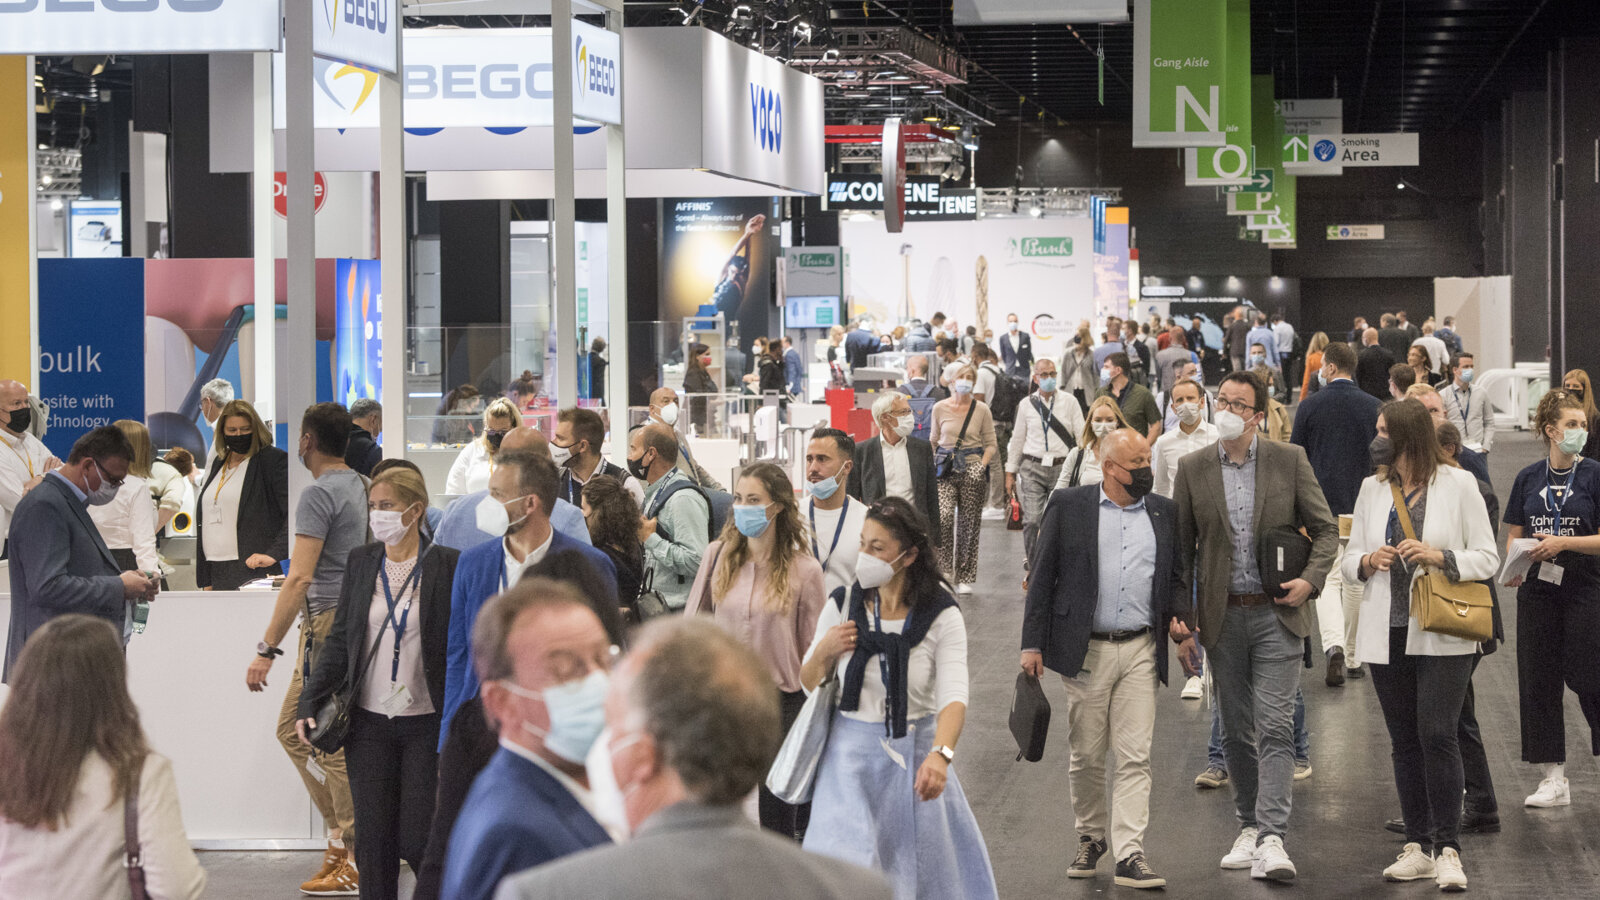 Outlook for the 40th International Dental Show: “Things are looking up”
